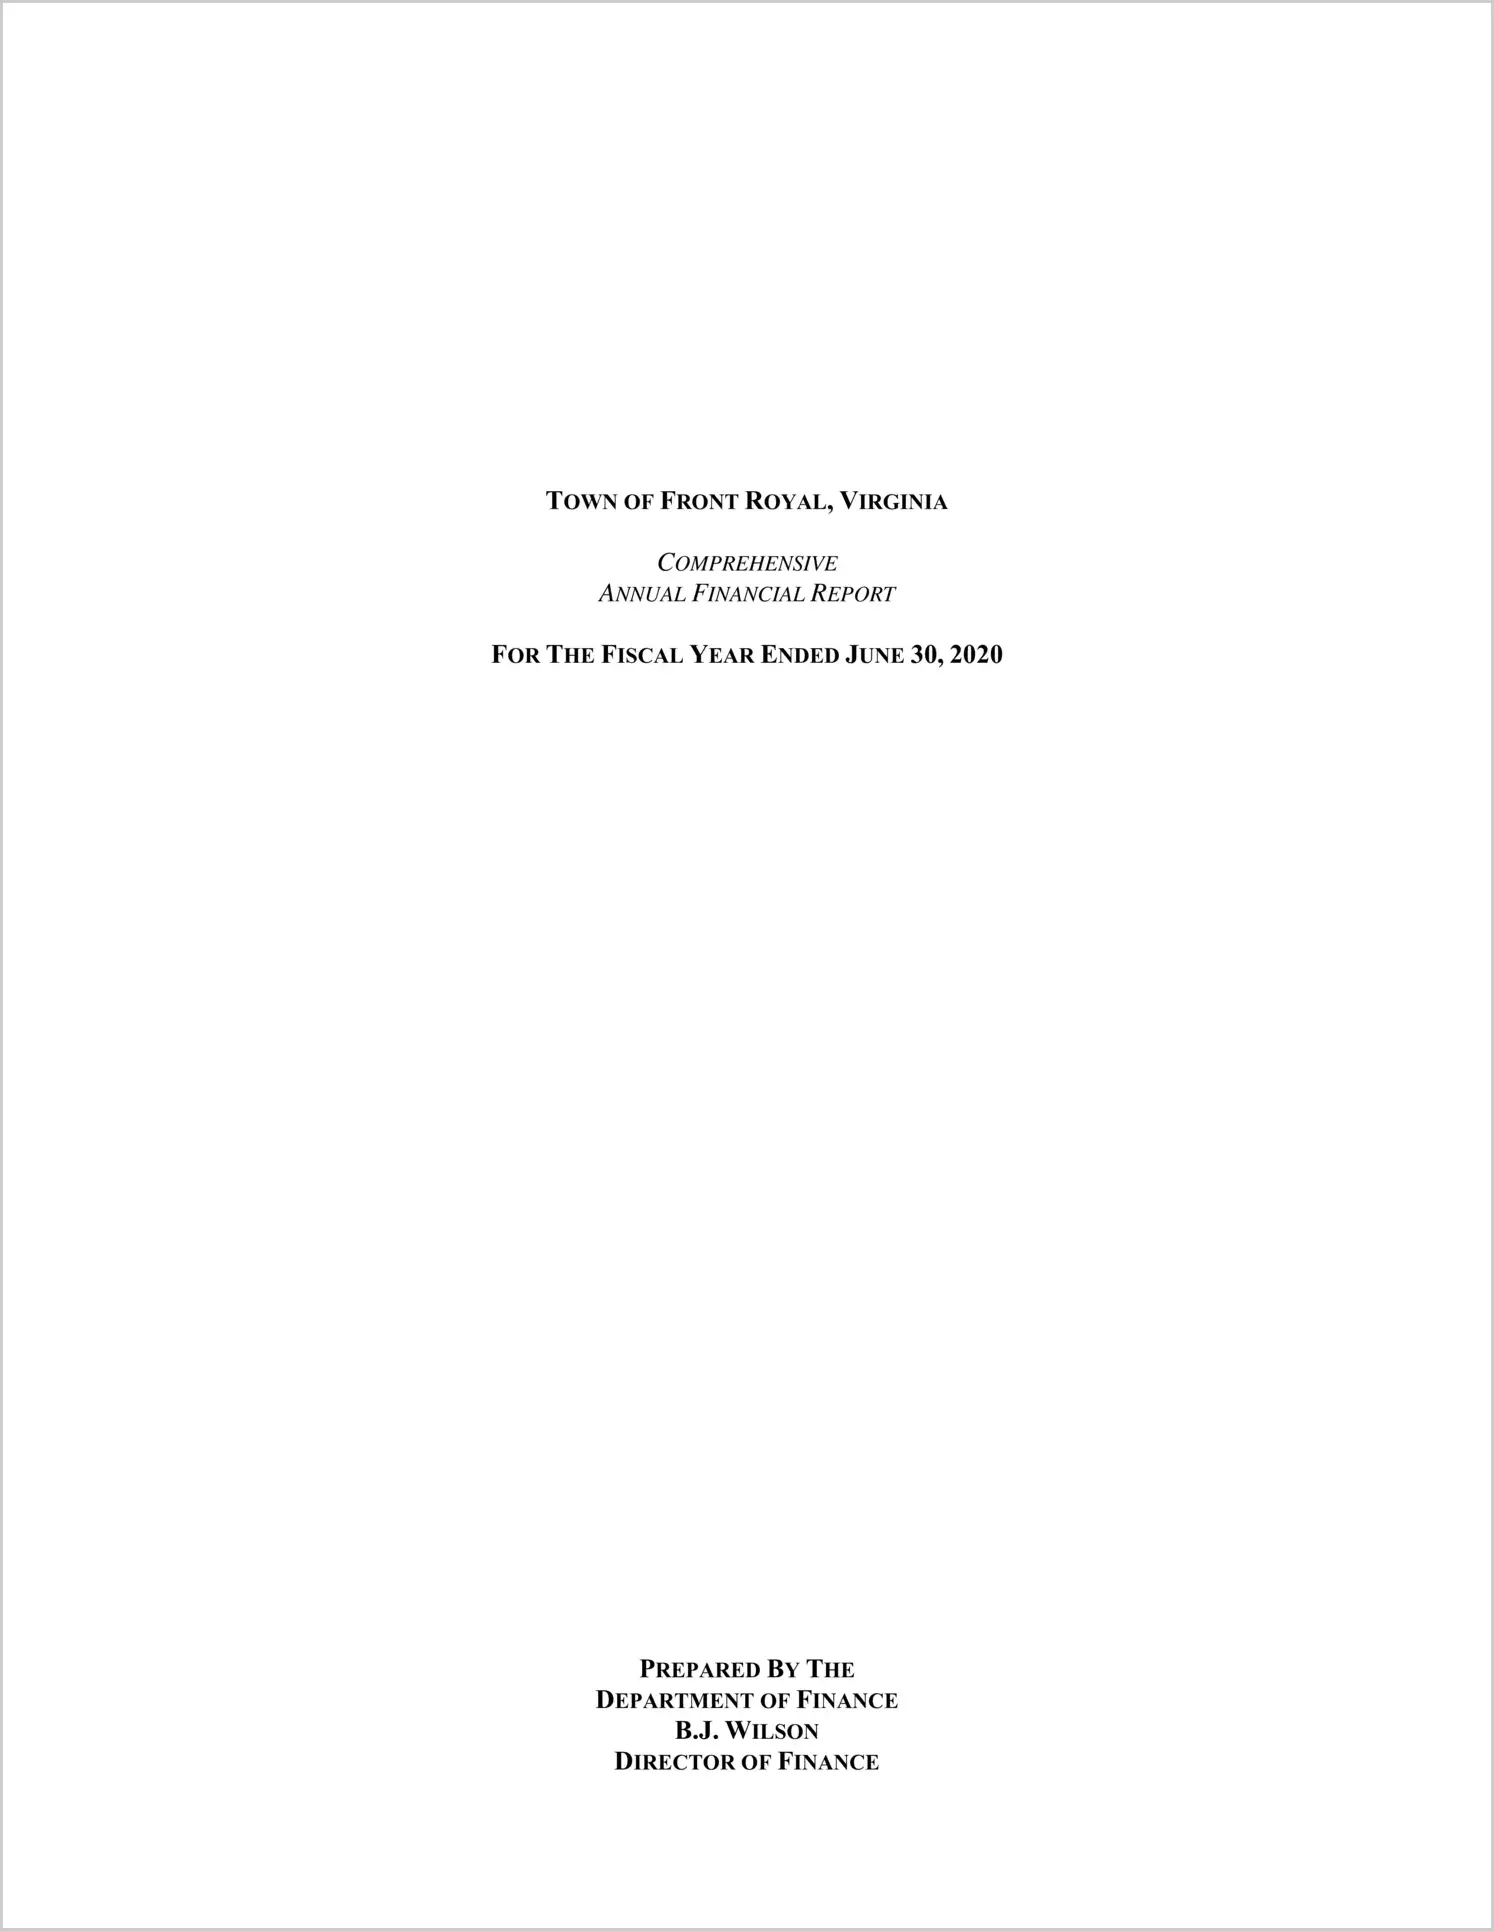 2020 Annual Financial Report for Town of Front Royal